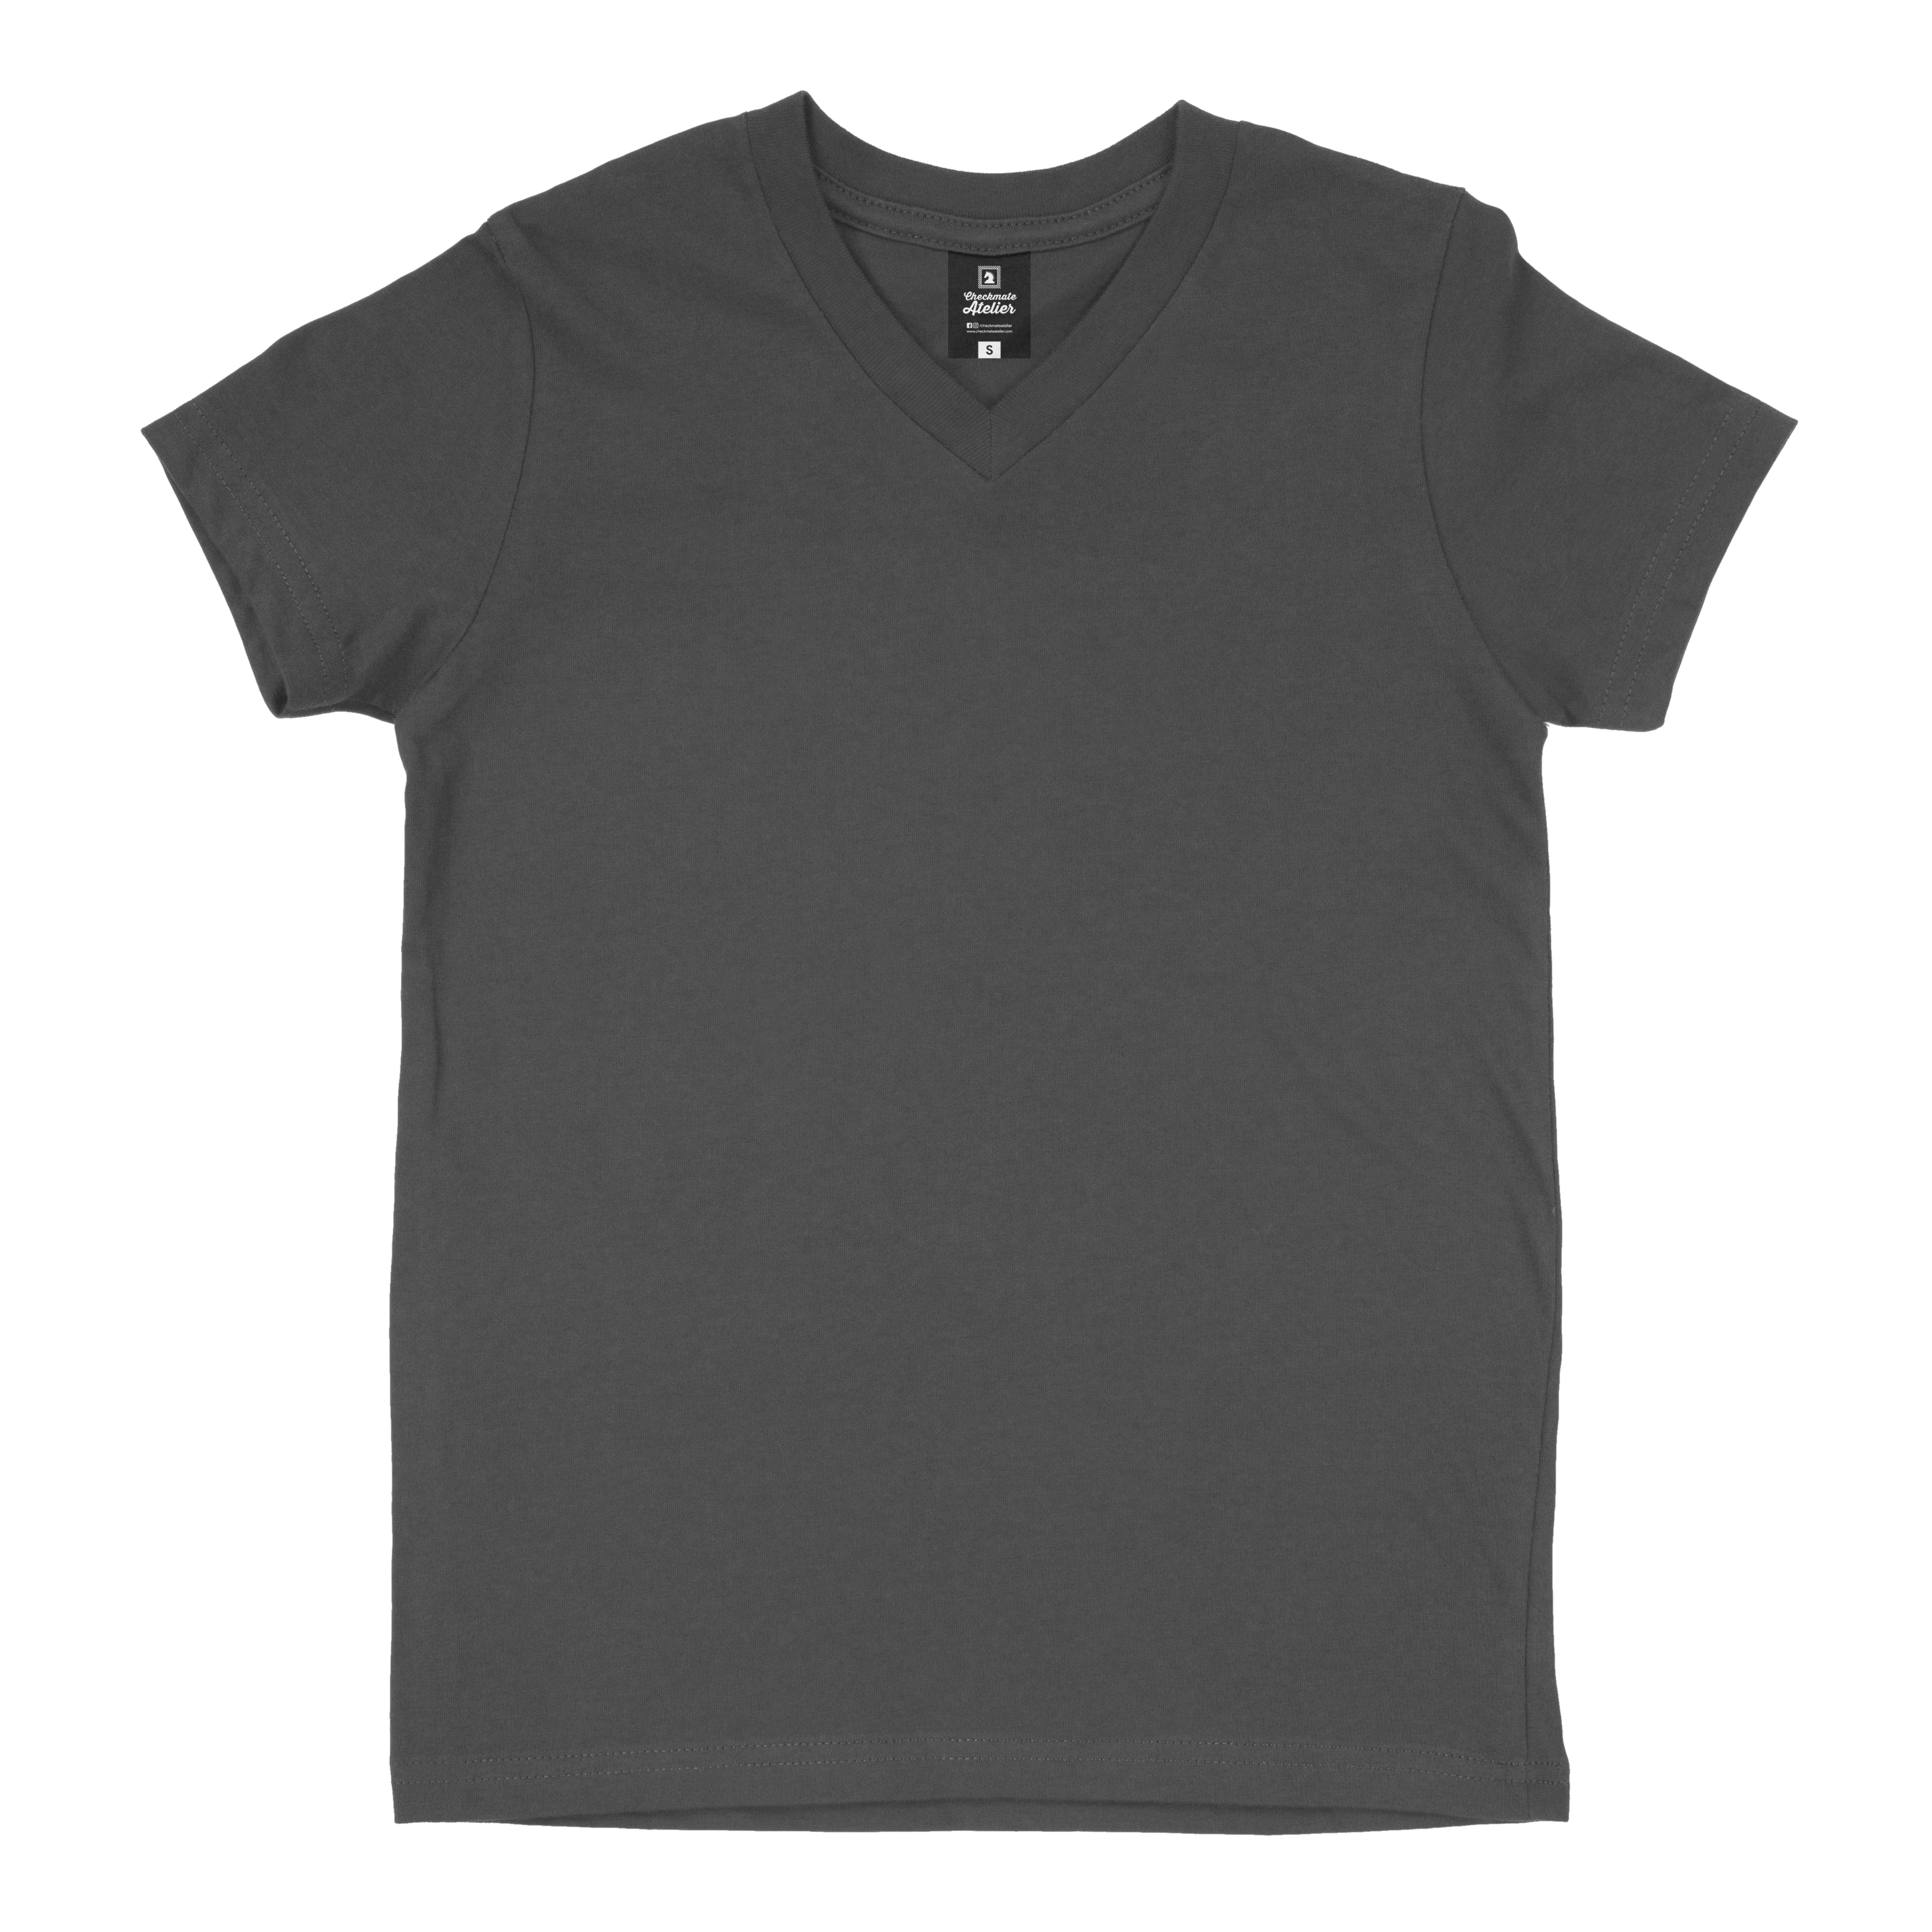 Charcoal V-Neck T-Shirt - Shop Now - Checkmate Atelier